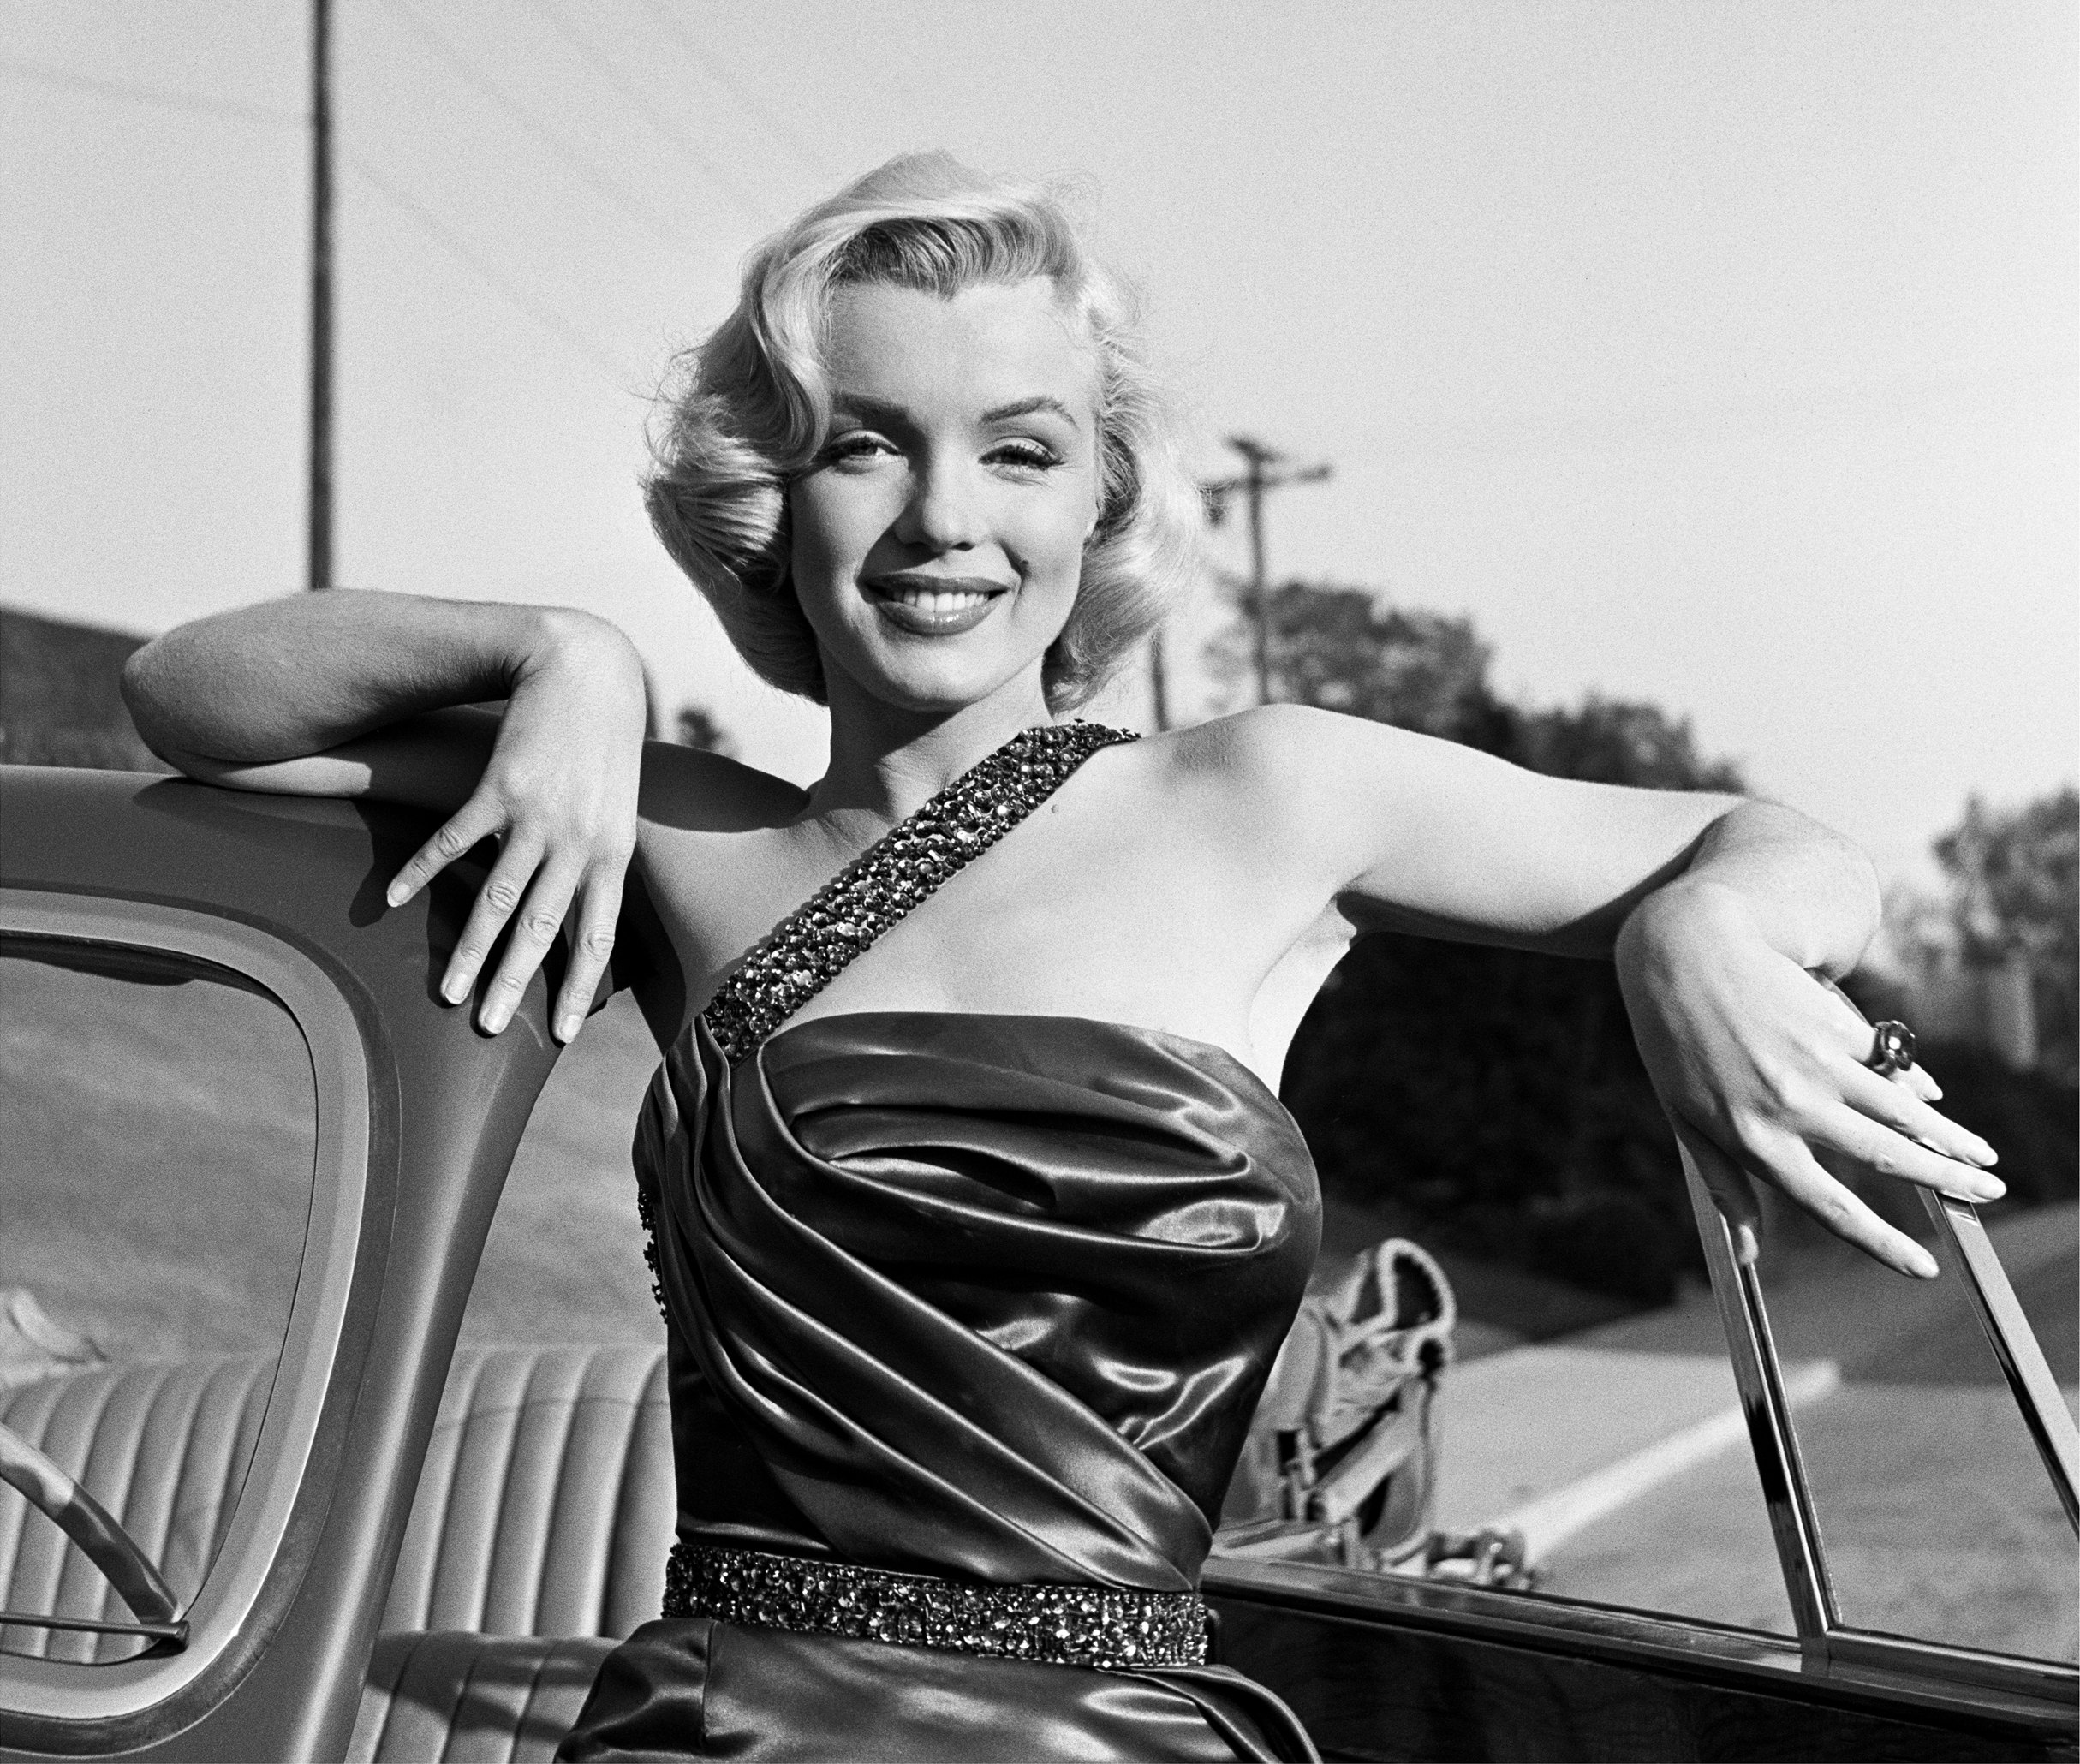 LOS ANGELES - 1953:  Actress Marilyn Monroe leans on a Singer Automobile as she poses for a portrait on the set of the movie 